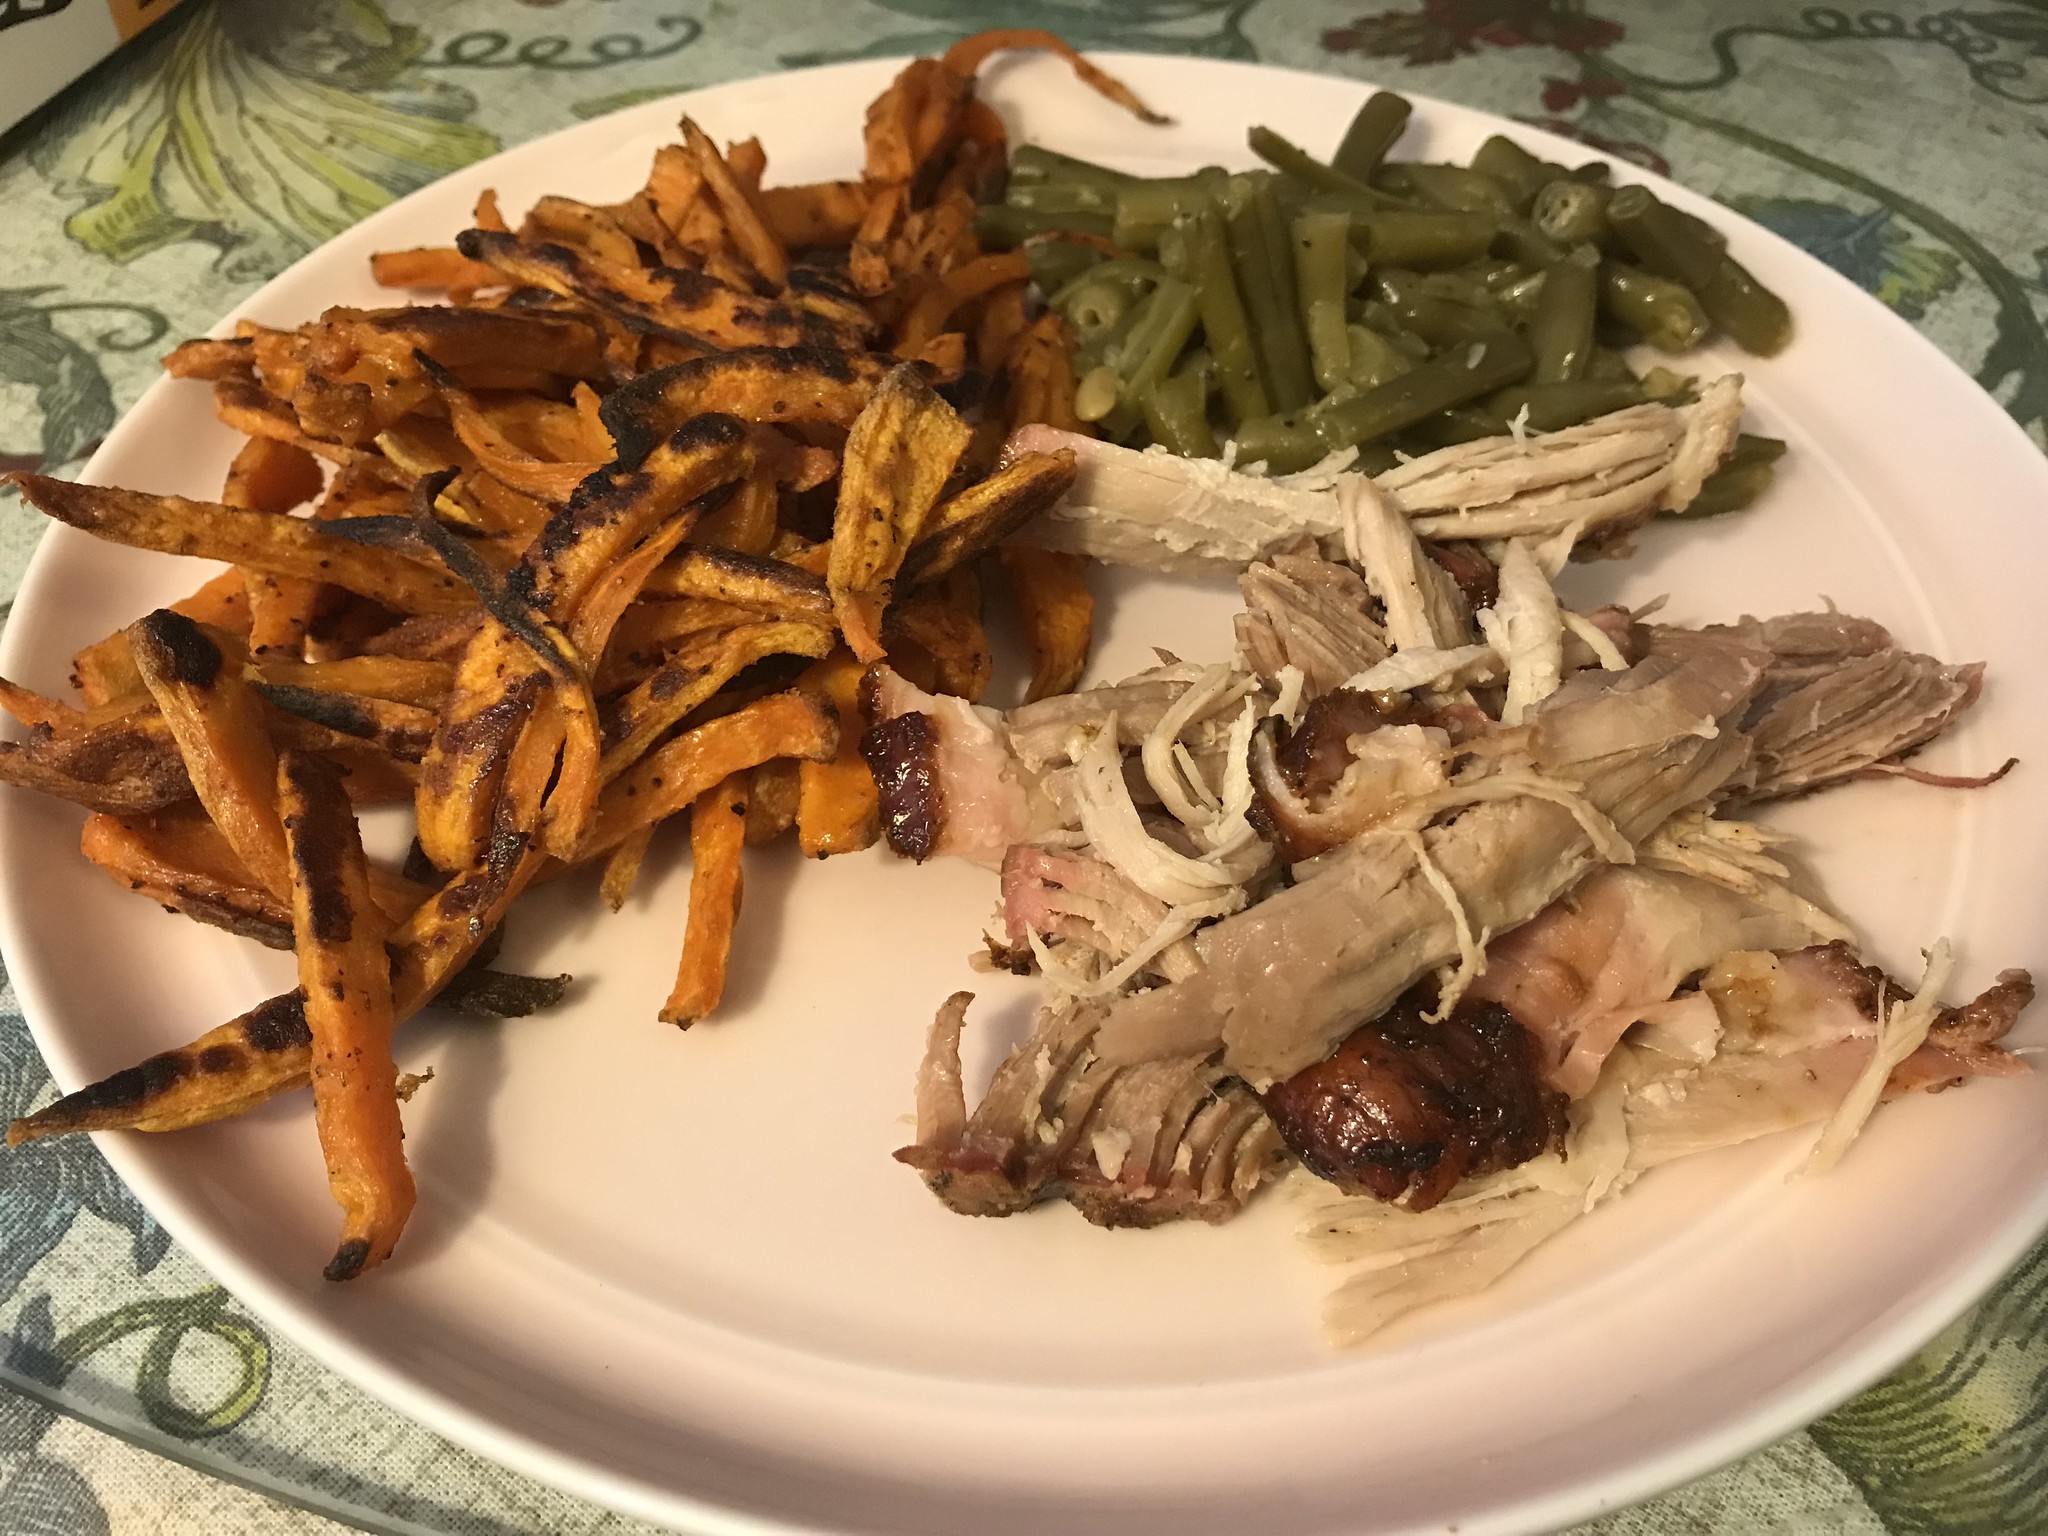 Picture of Pulled Pork, Sweet Potato Fries, and Green Beans